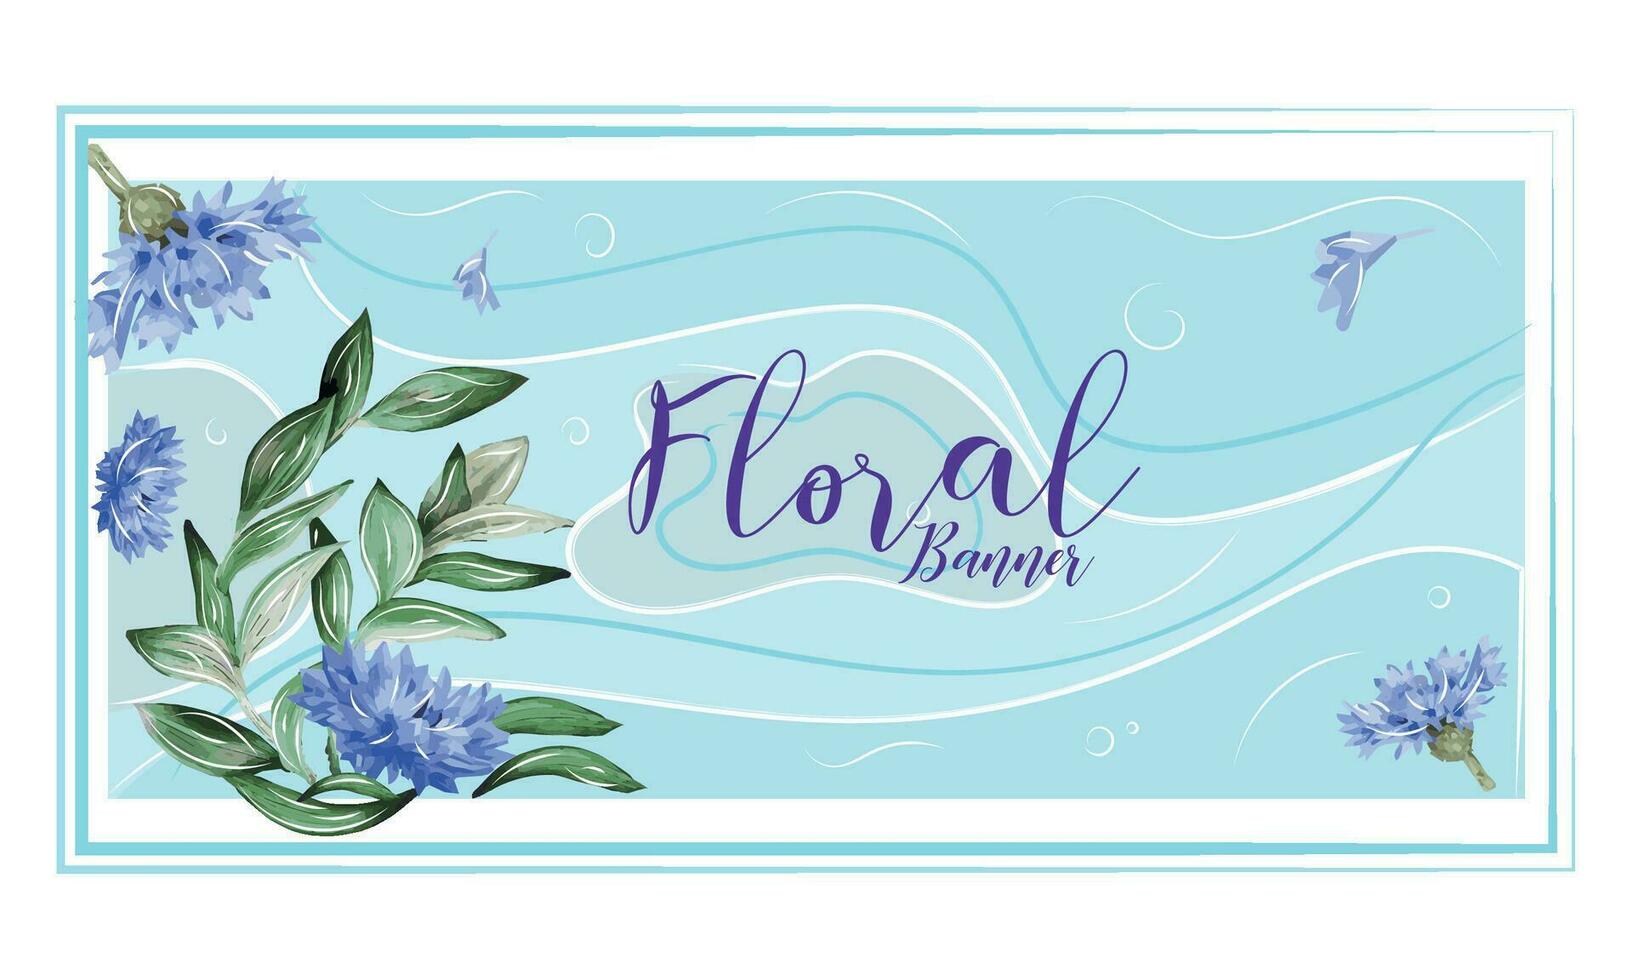 Isolated watercolored floral banner with text Vector illustration